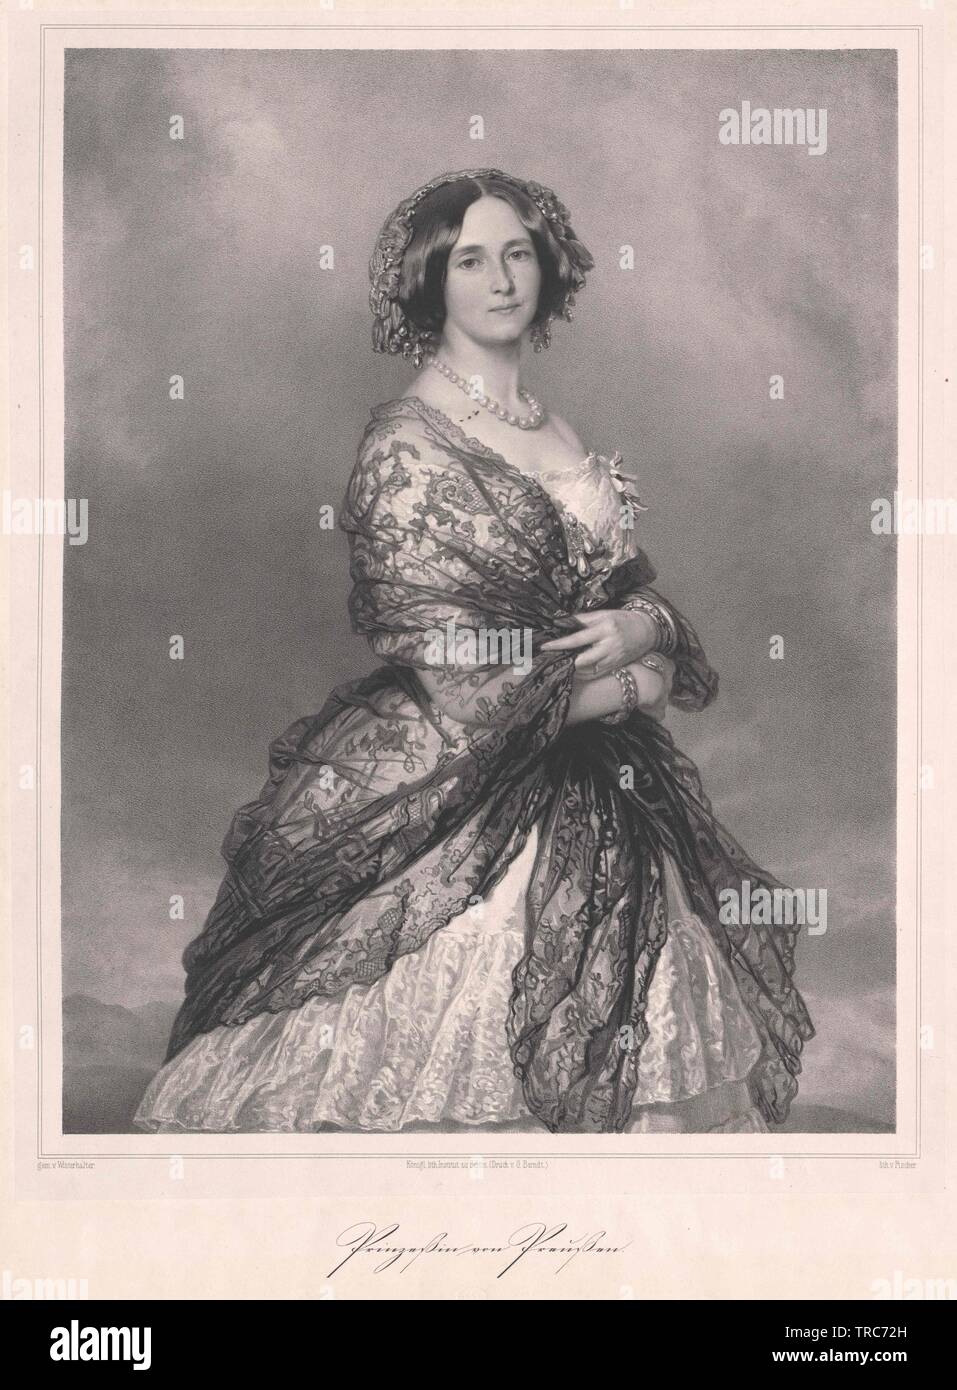 Augusta, principessa di Sassonia-weimar Eisenach, Additional-Rights-Clearance-Info-Not-Available Foto Stock